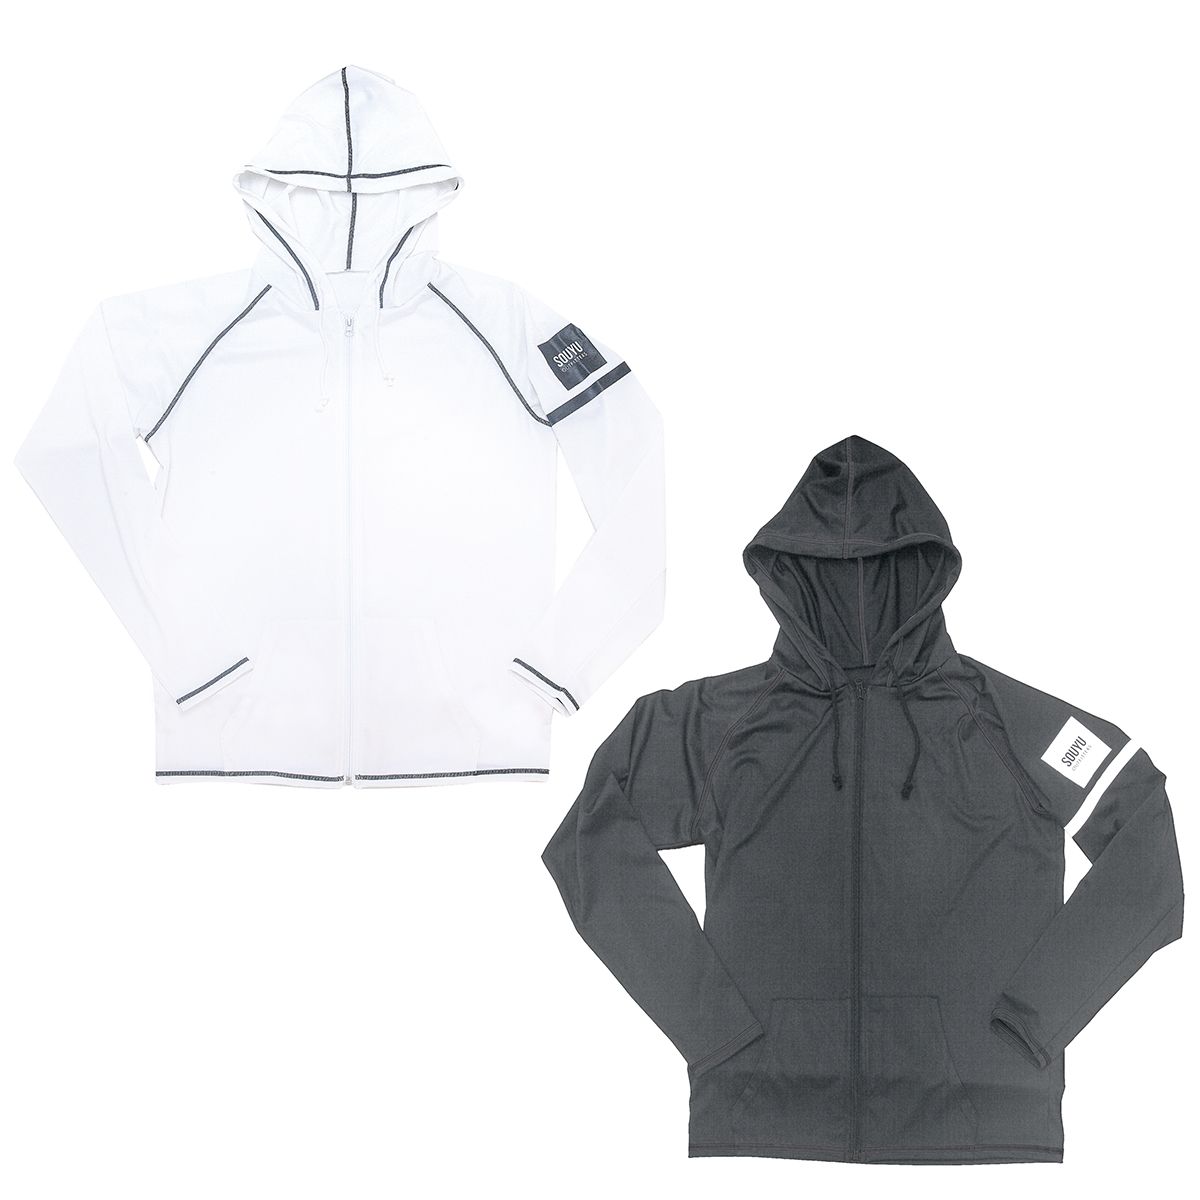 RASH HOODIE ラッシュフード Number : s20-so-04 Fabric : Polyester 87% PU 13% Size : XS, S, M, L, XL Color:White, Black Price : ¥7,800